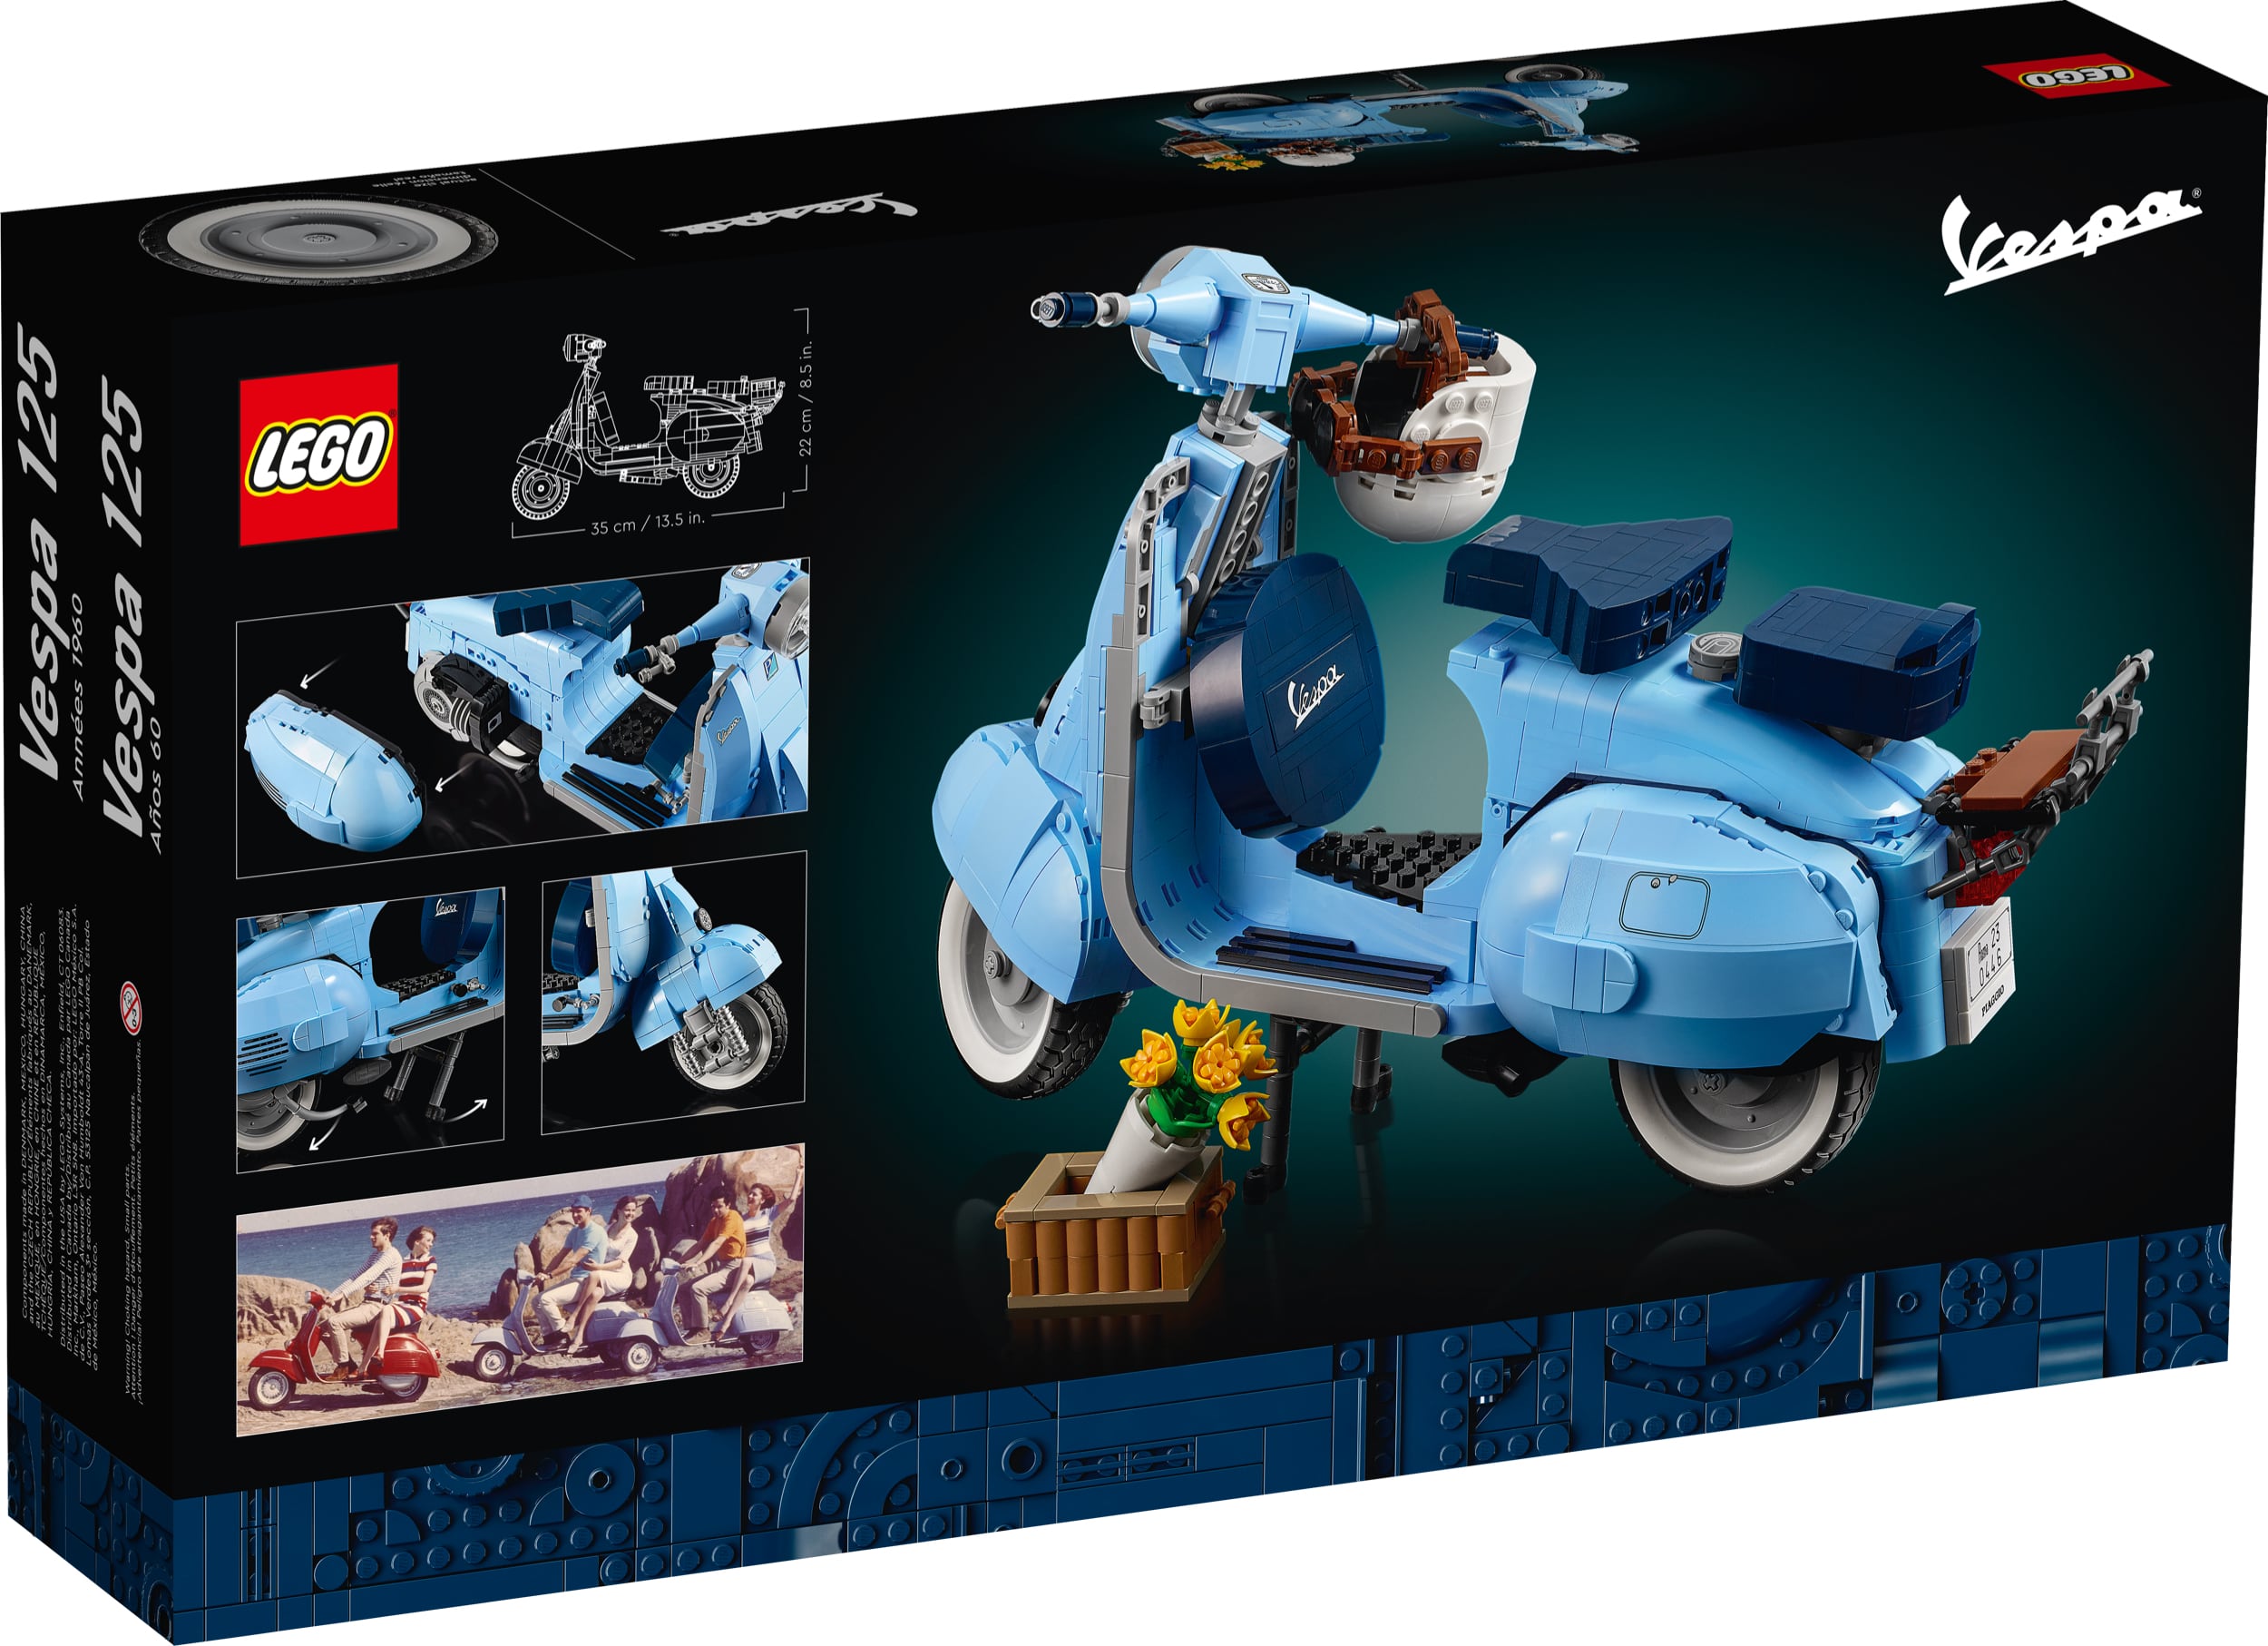 An Italian Style Icon: The elegance of the 1960's with the new LEGO® Vespa  125